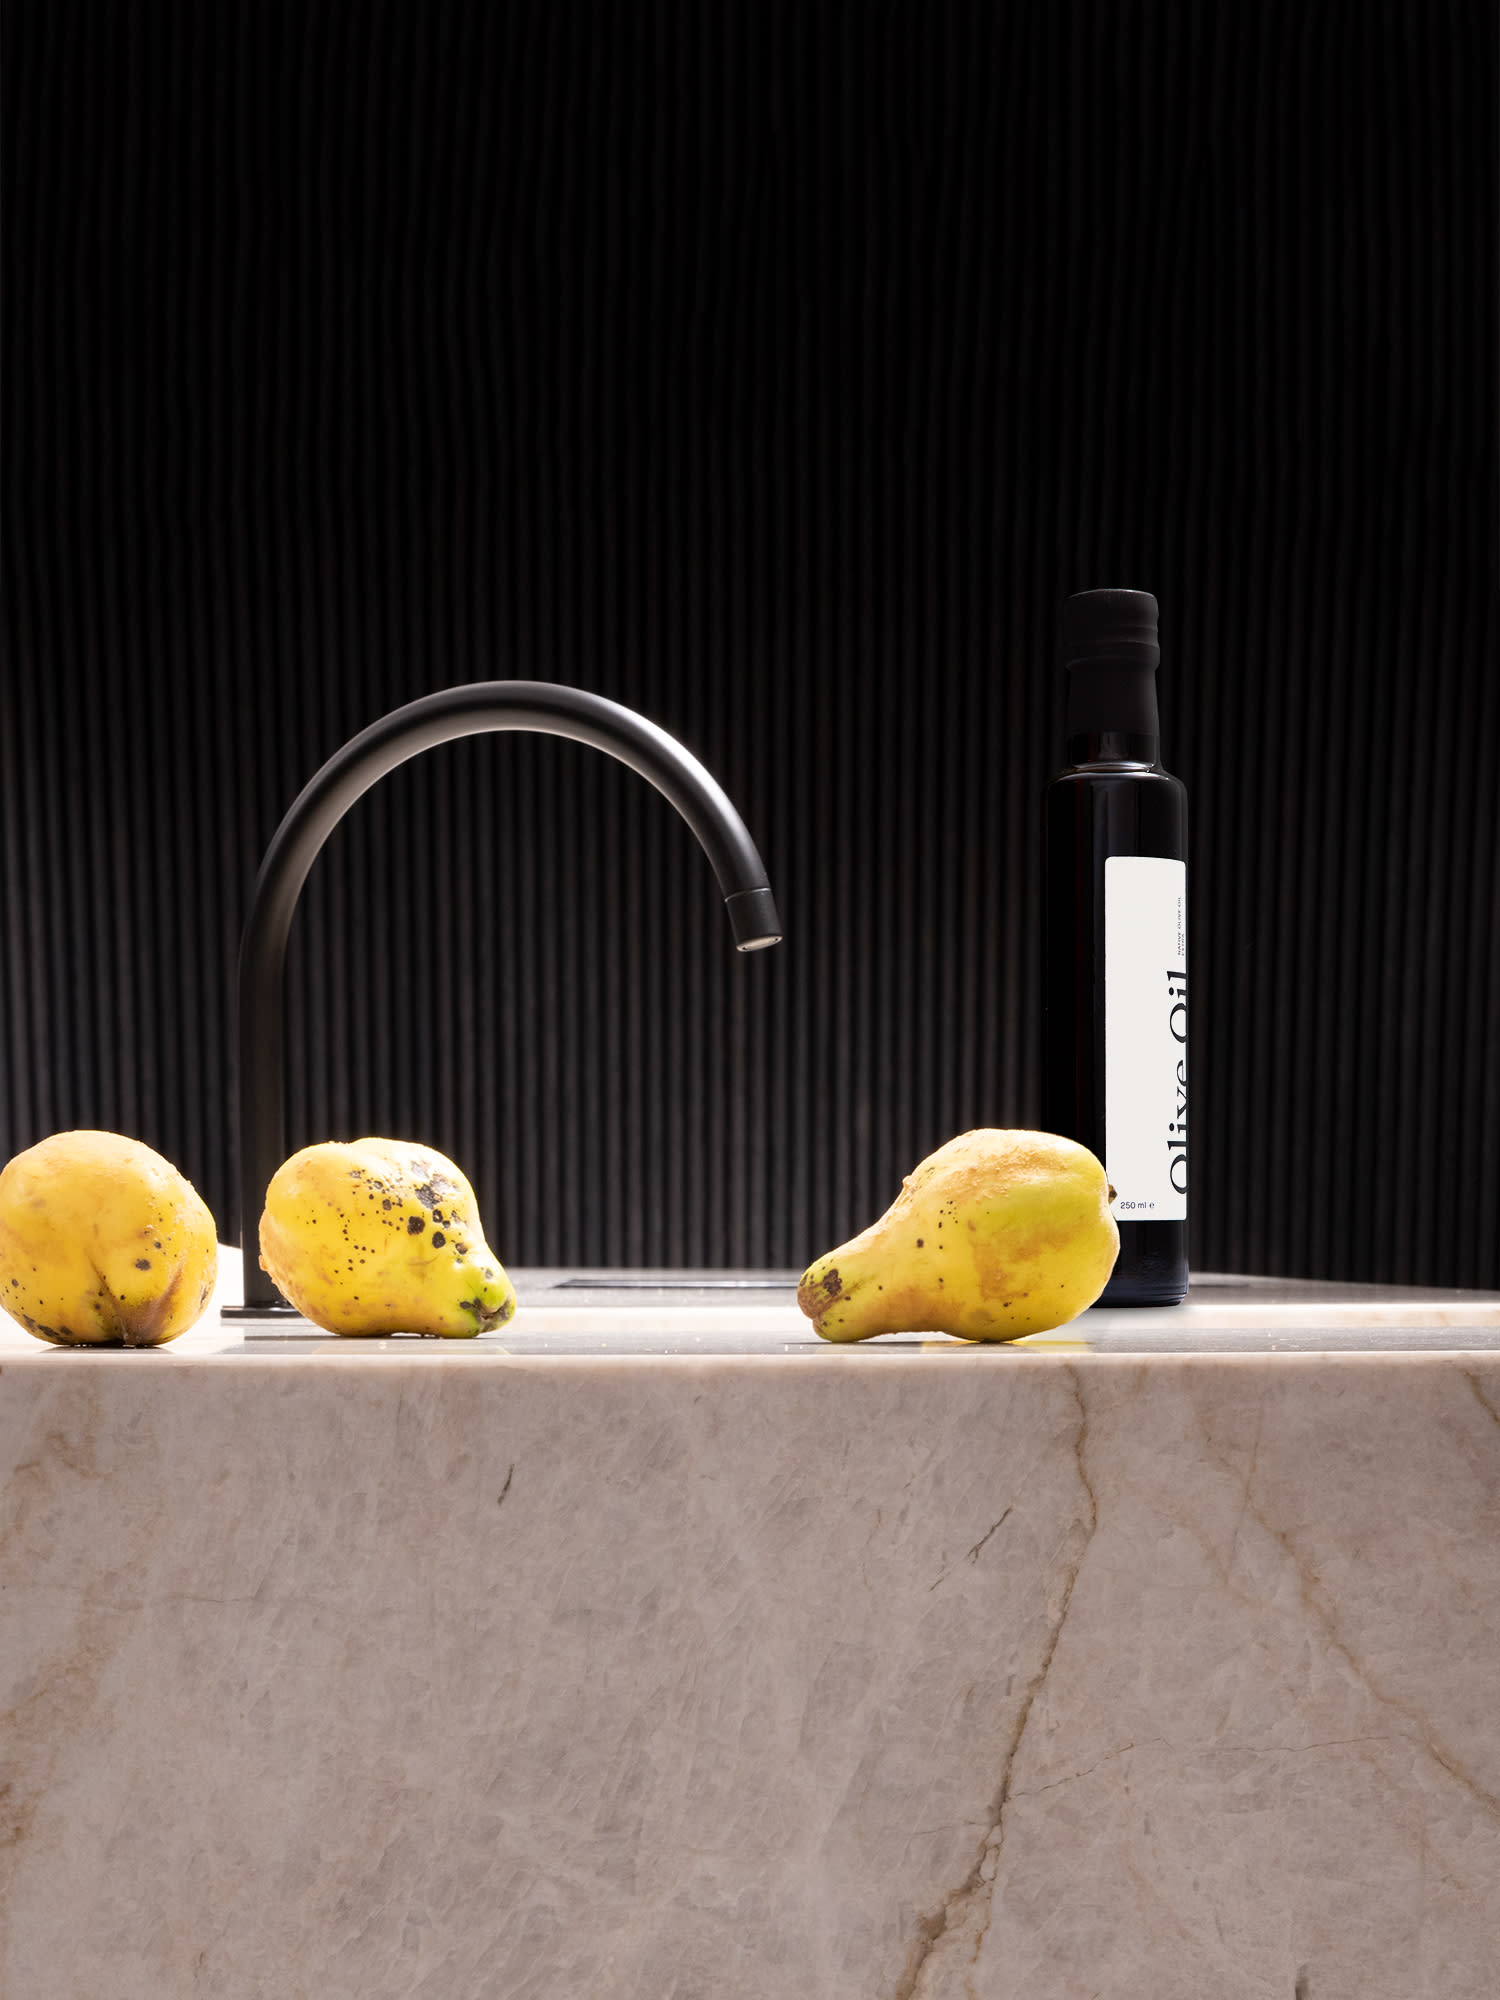 Poggenpohl olive oil on a kitchen counter with sink and three pears in the foreground.